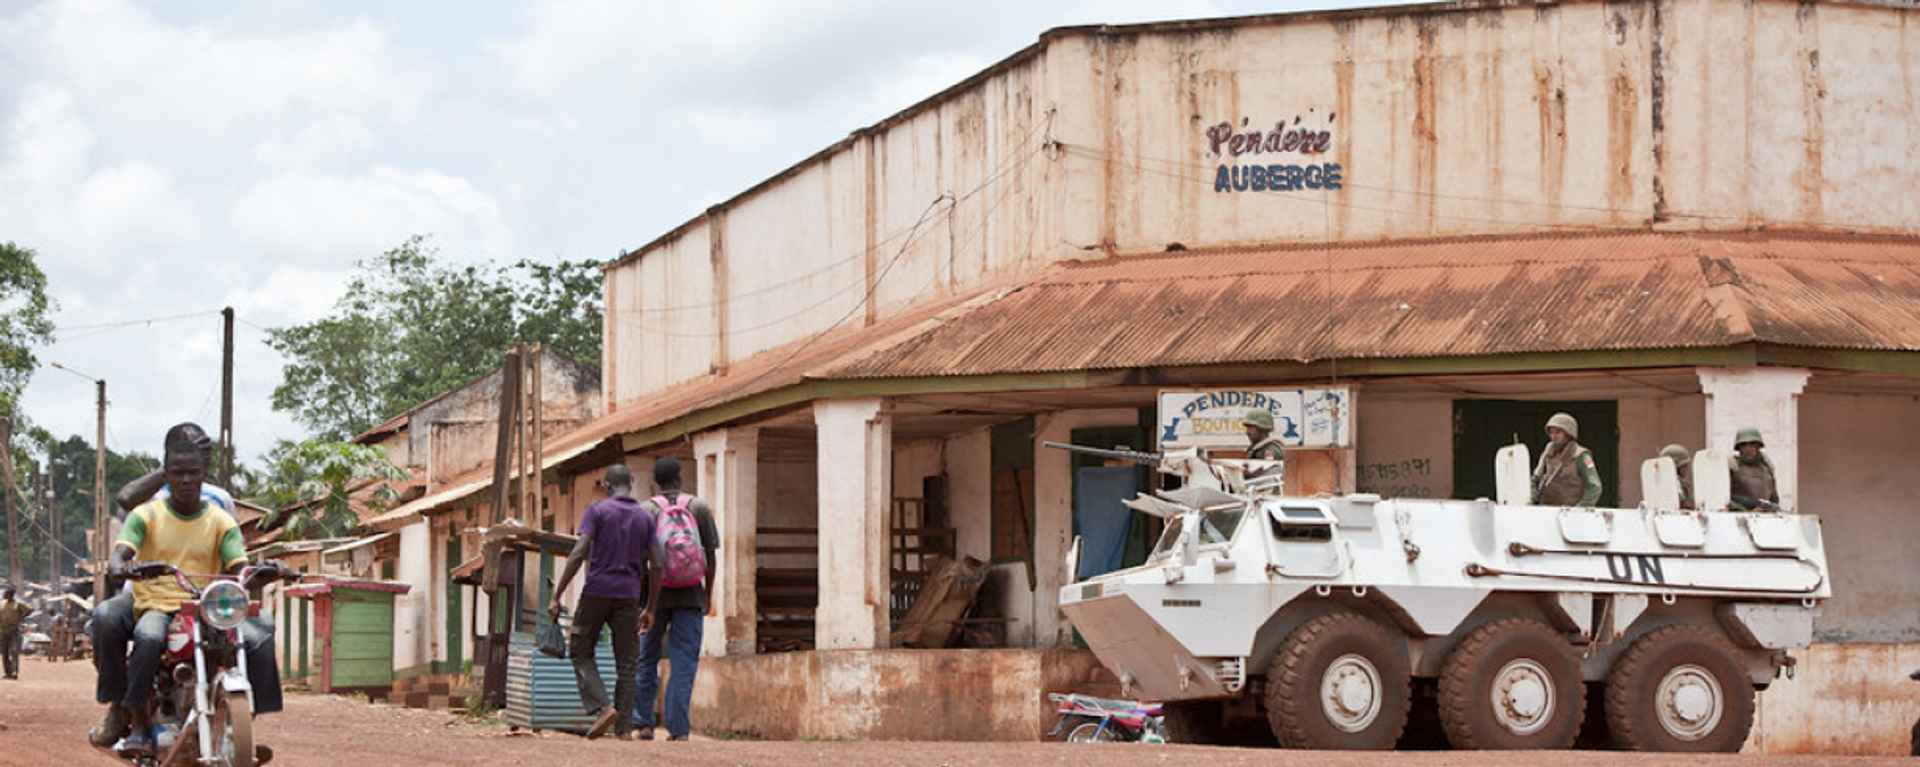 A Patria Pasi armored personnel carrier stands guard as part of the United Nations Multidimensional Integrated Stabilization Mission in the Central African Republic (MINUSCA) - Sputnik International, 1920, 25.06.2021